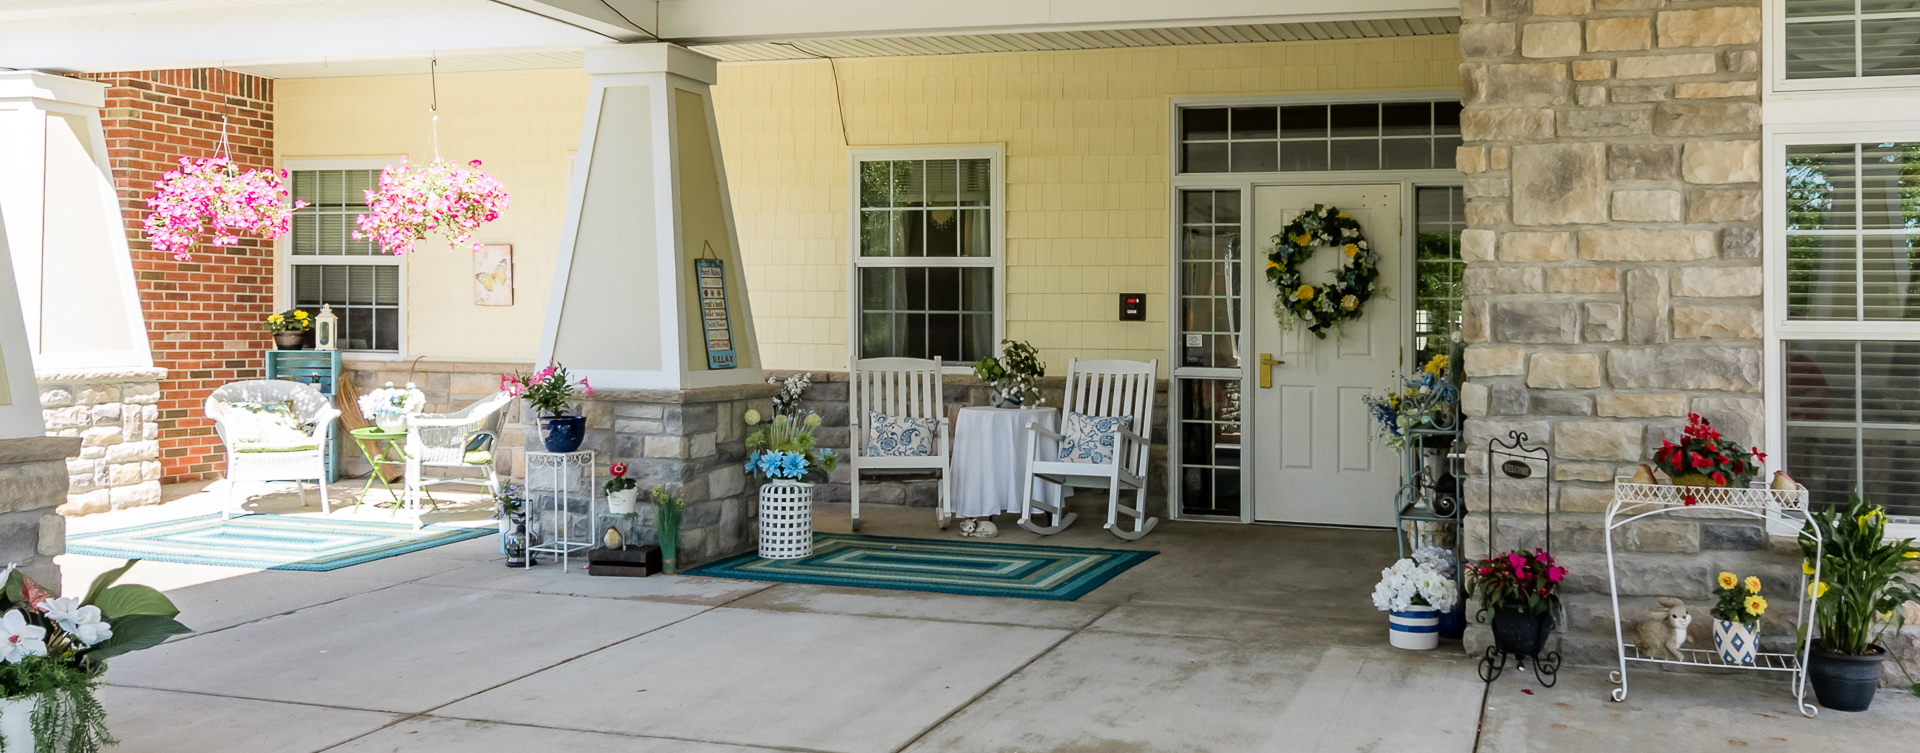 Sip on your favorite drink on the porch at Bickford of Midland